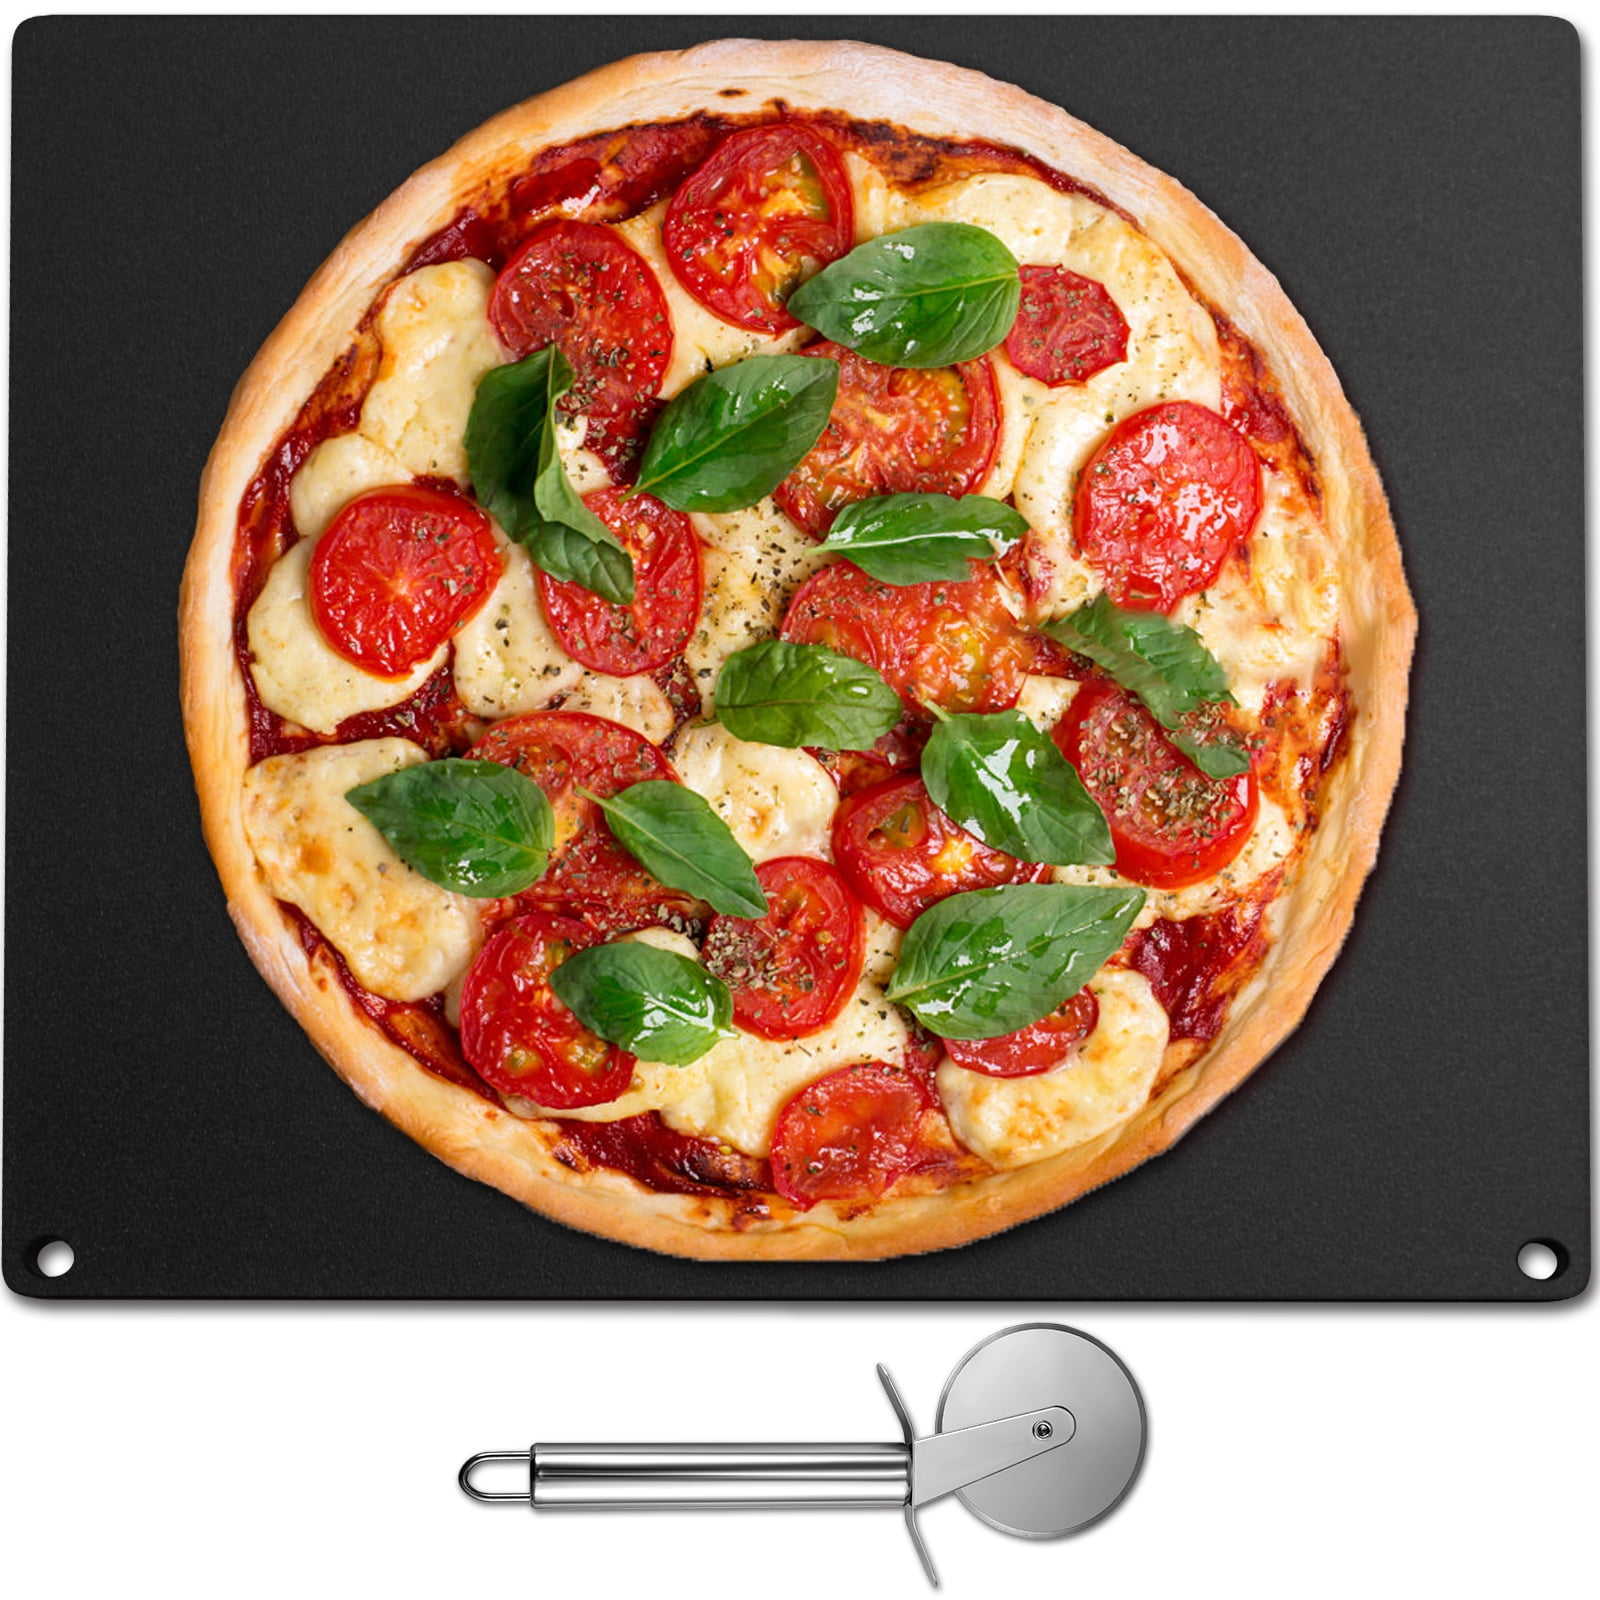 VEVOR Steel Pizza Stone, 16.1 x 14.2 x 0.4, A36 Steel Baking Steel Pizza  Stone for Oven and Grill, Large Size Steel Pizza Pan with 20x Higher